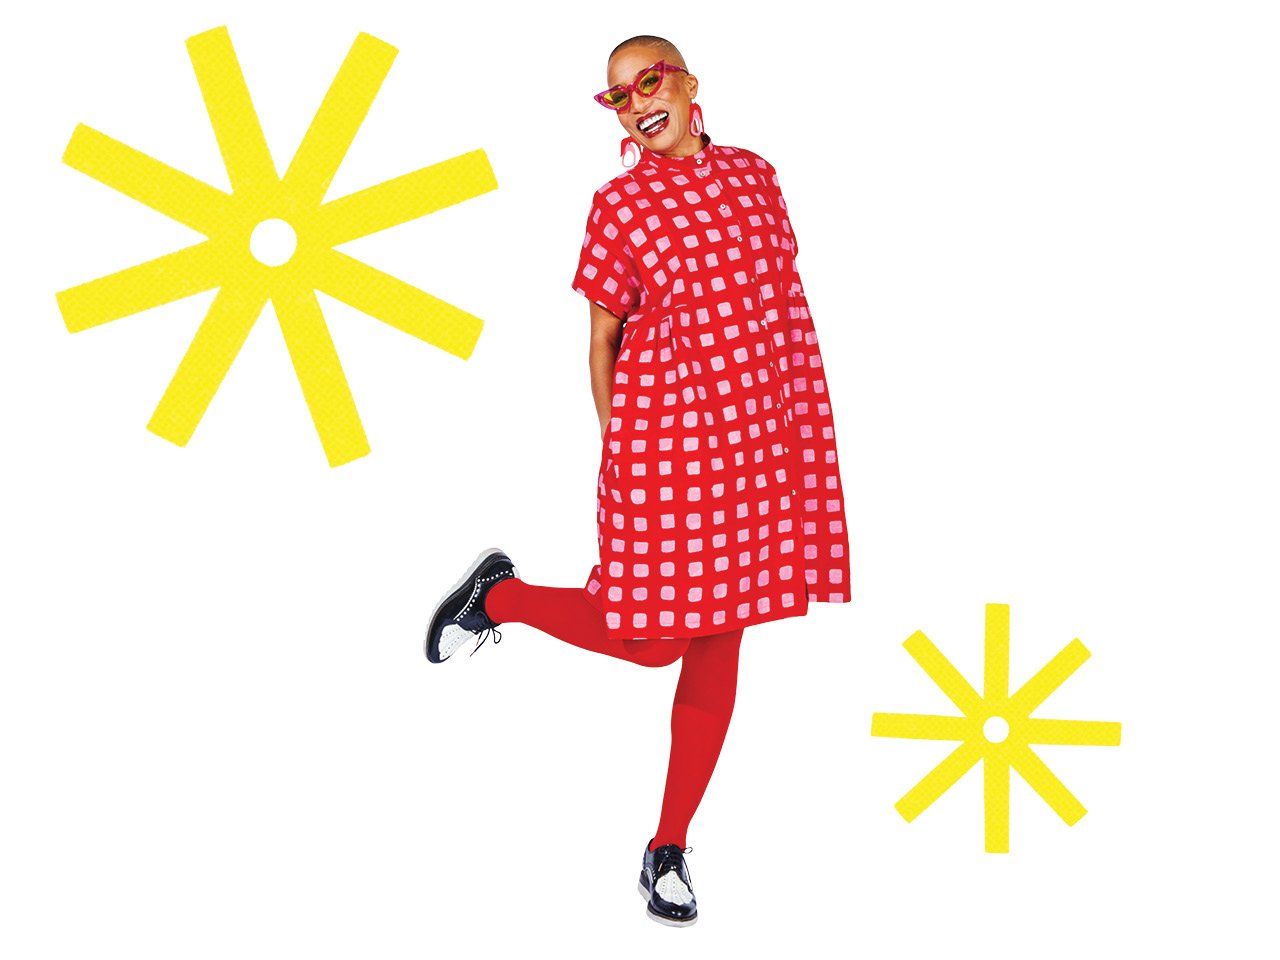 Dress: oseiduro. A woman standing and bending kicking her foot back, wearing a red dress with a small light pink square pattern.